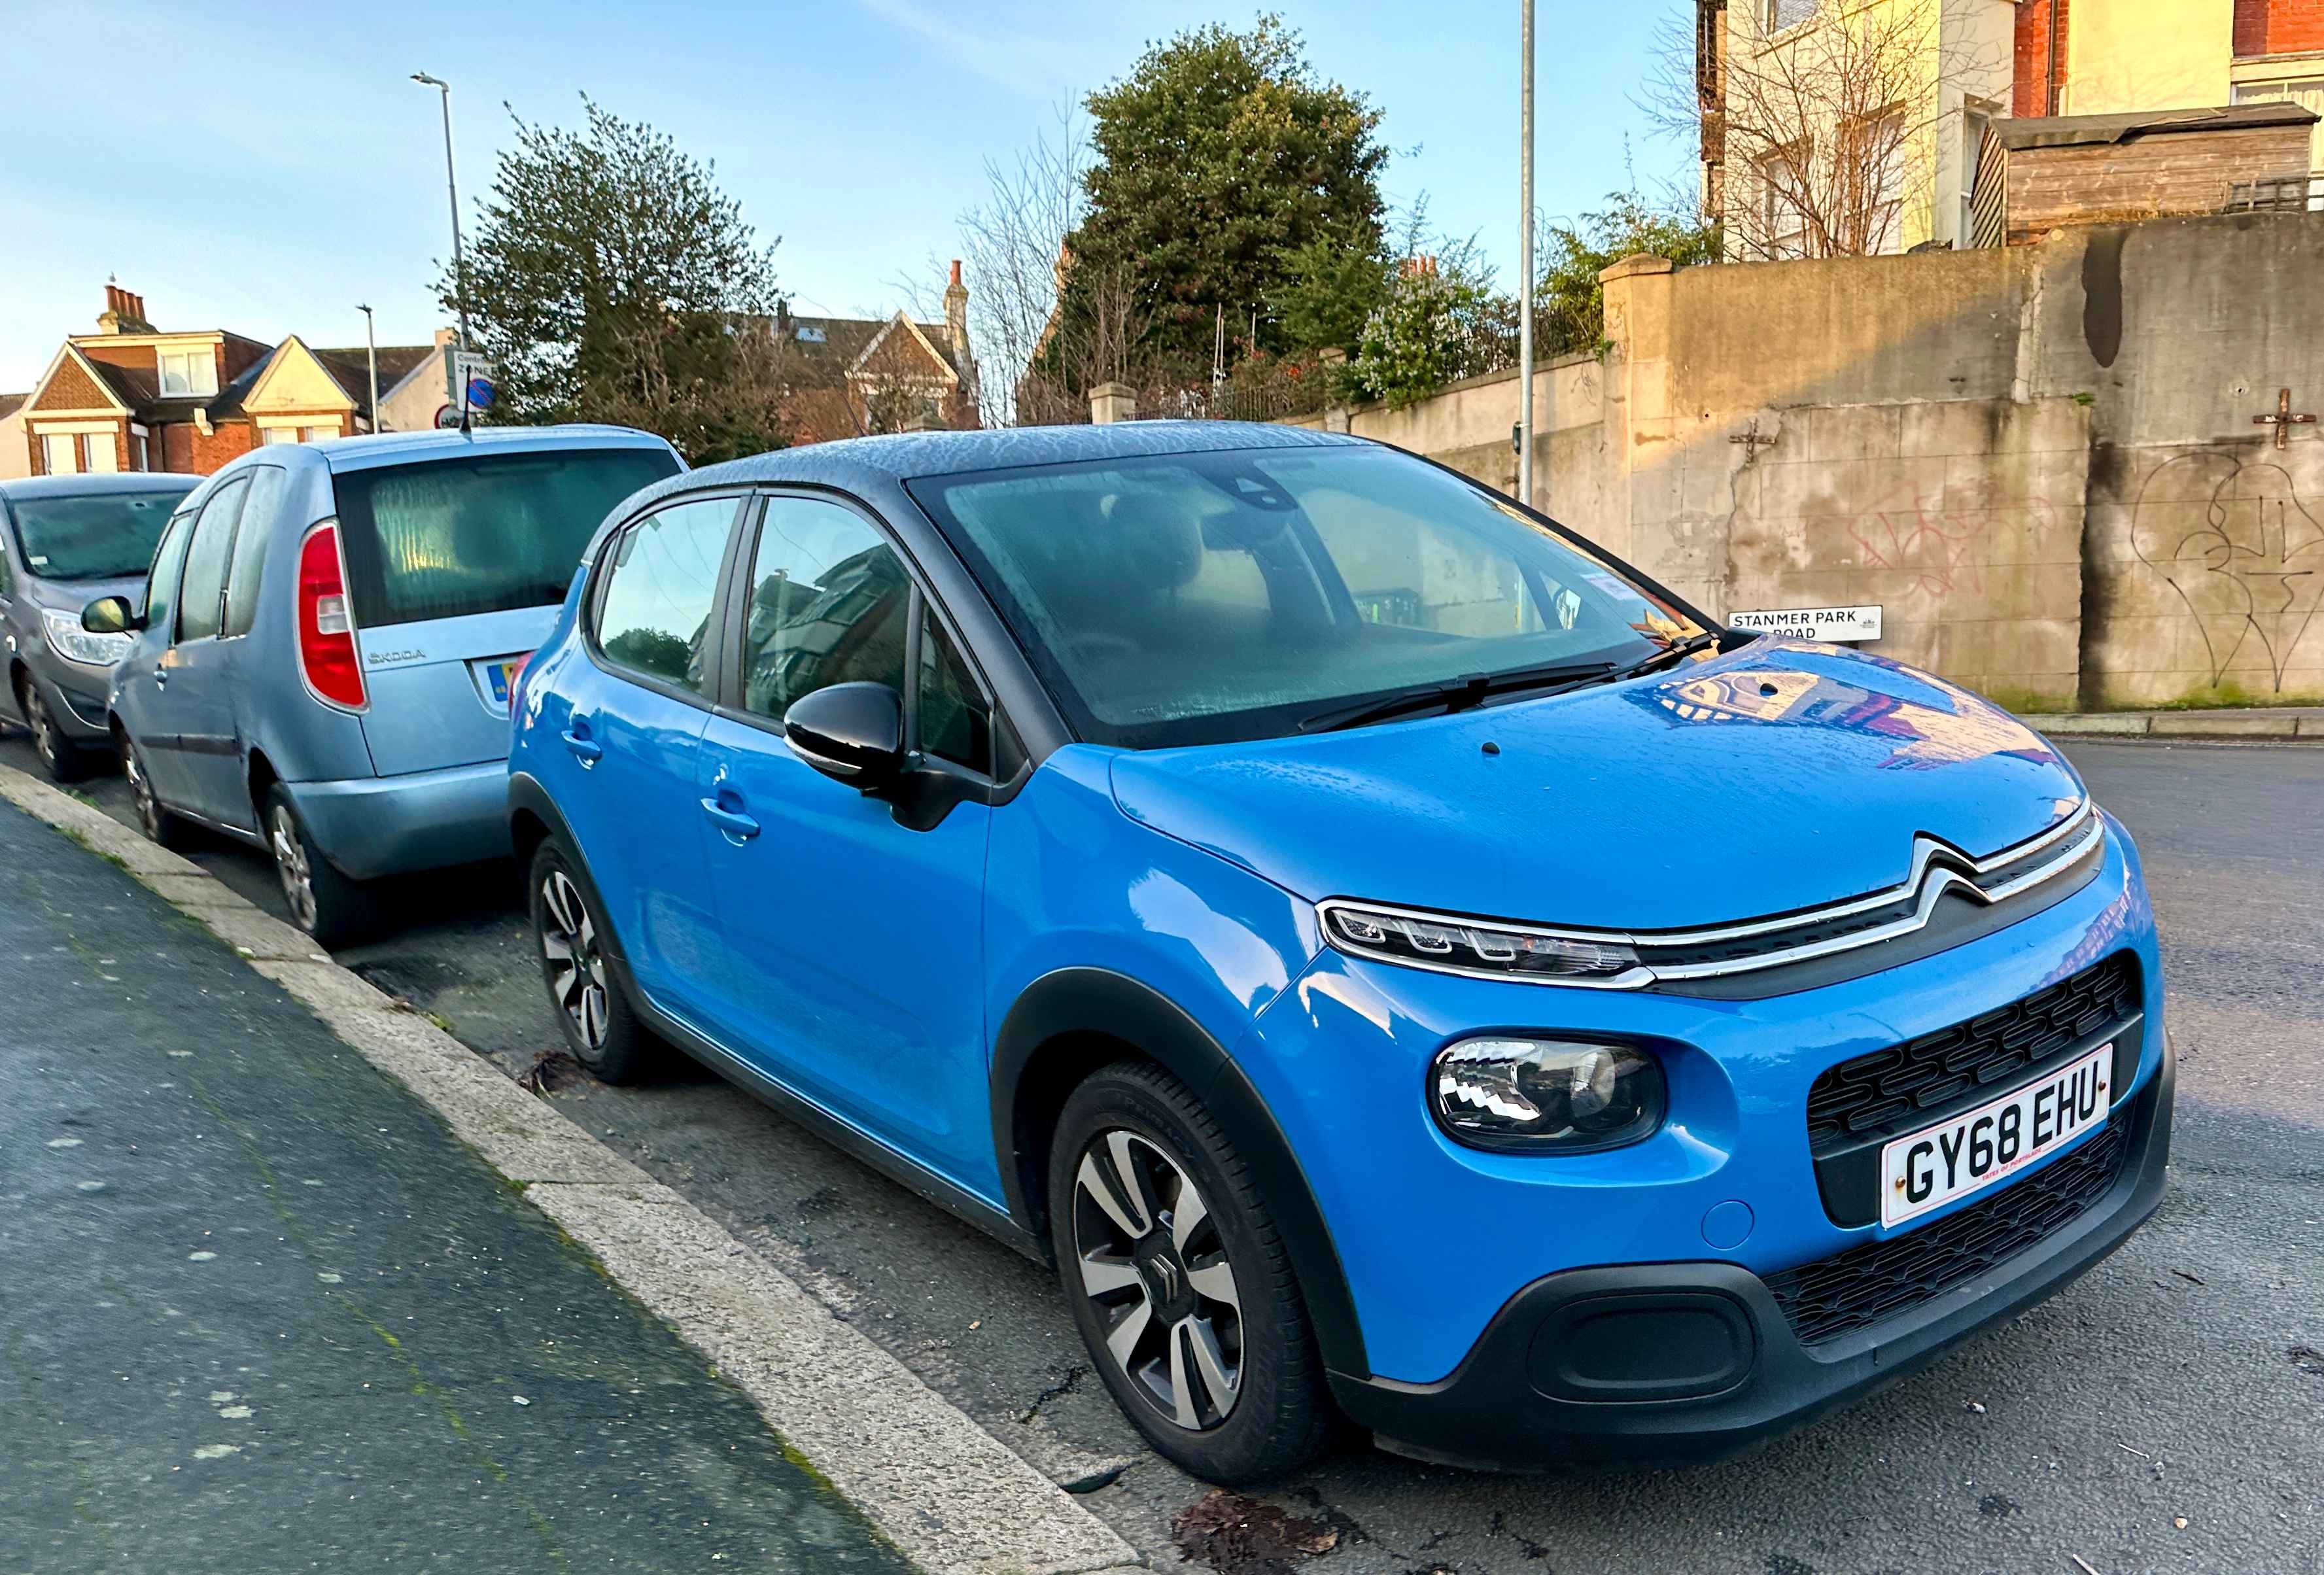 Photograph of GY68 EHU - a Blue Citroen C3 parked in Hollingdean by a non-resident who uses the local area as part of their Brighton commute. The twelfth of twelve photographs supplied by the residents of Hollingdean.